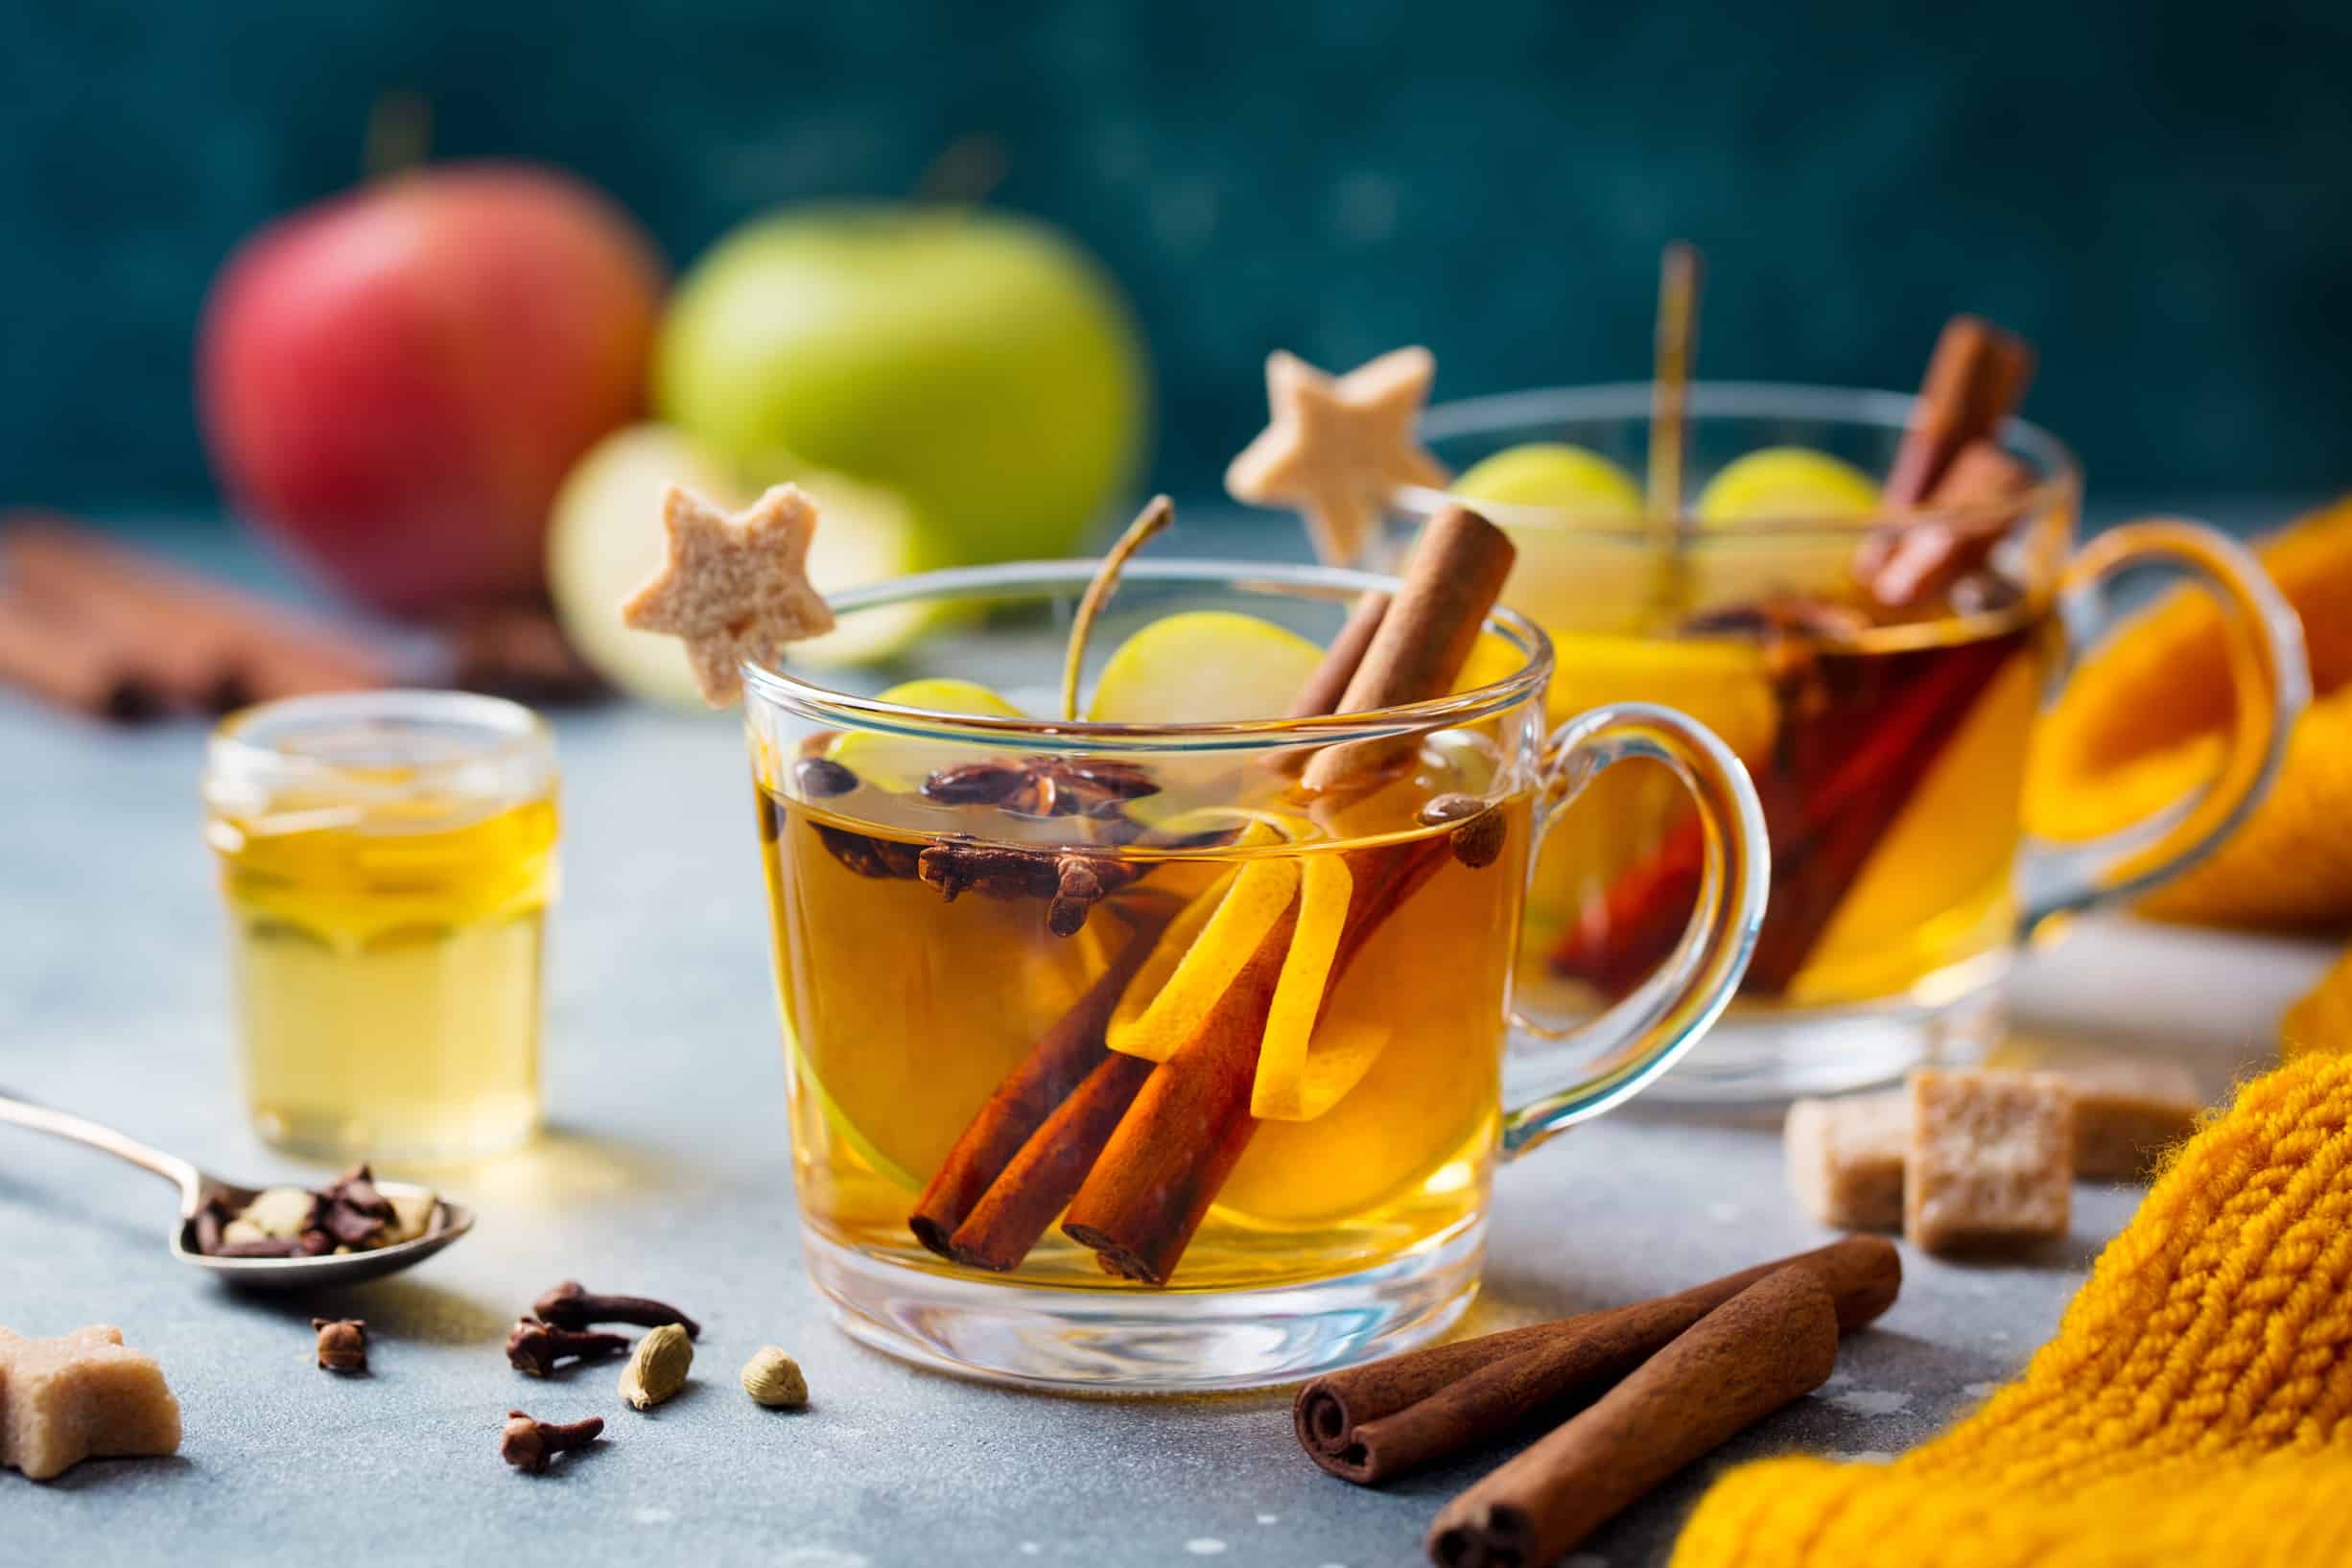 festive holiday drinks include hot apple cider